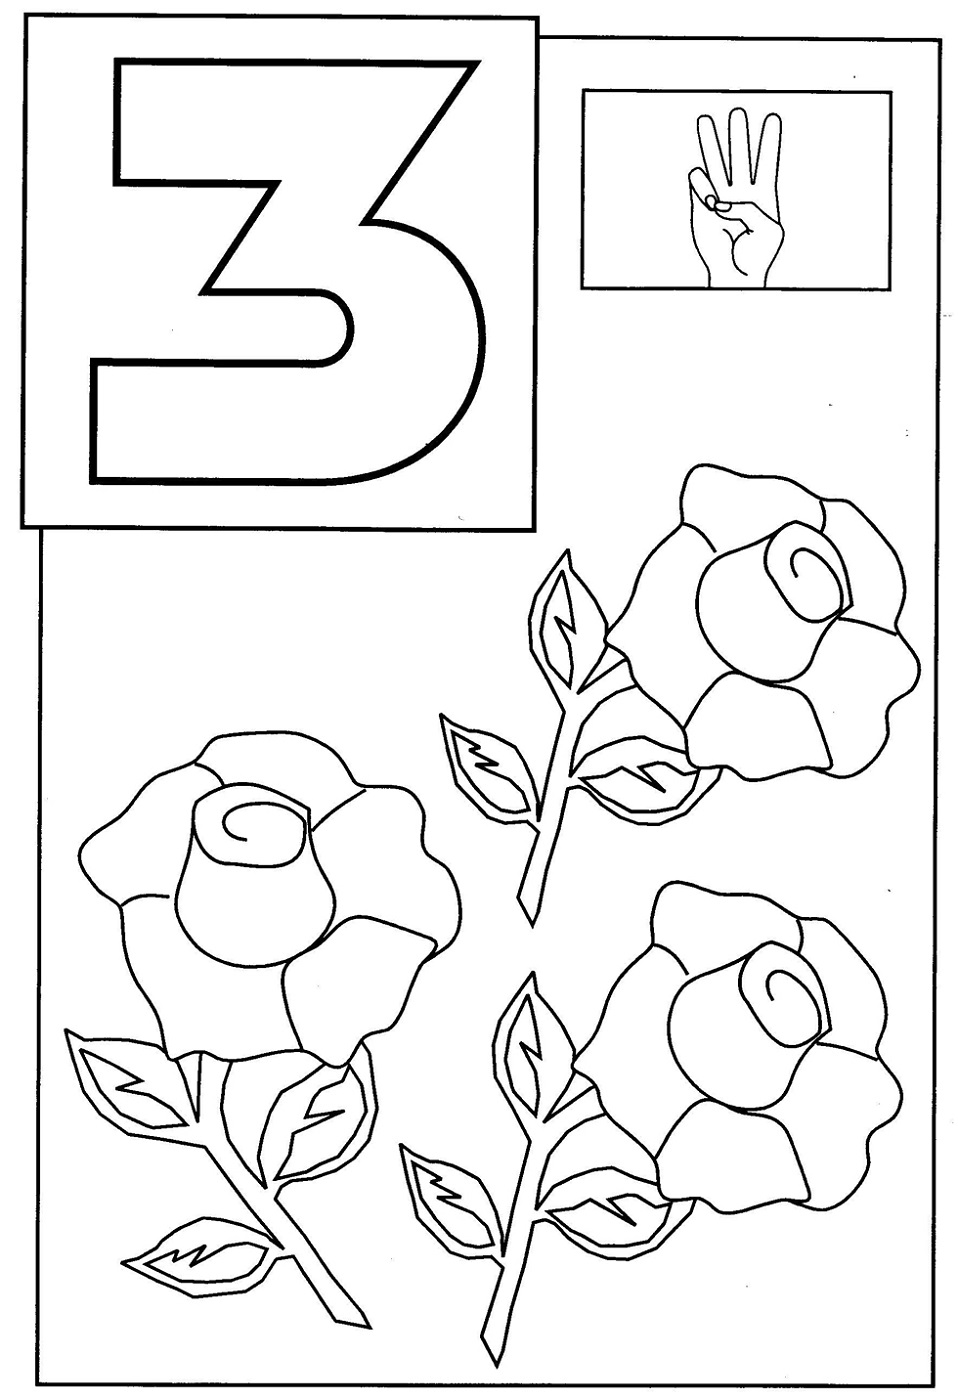 Coloring Worksheets for Toddlers